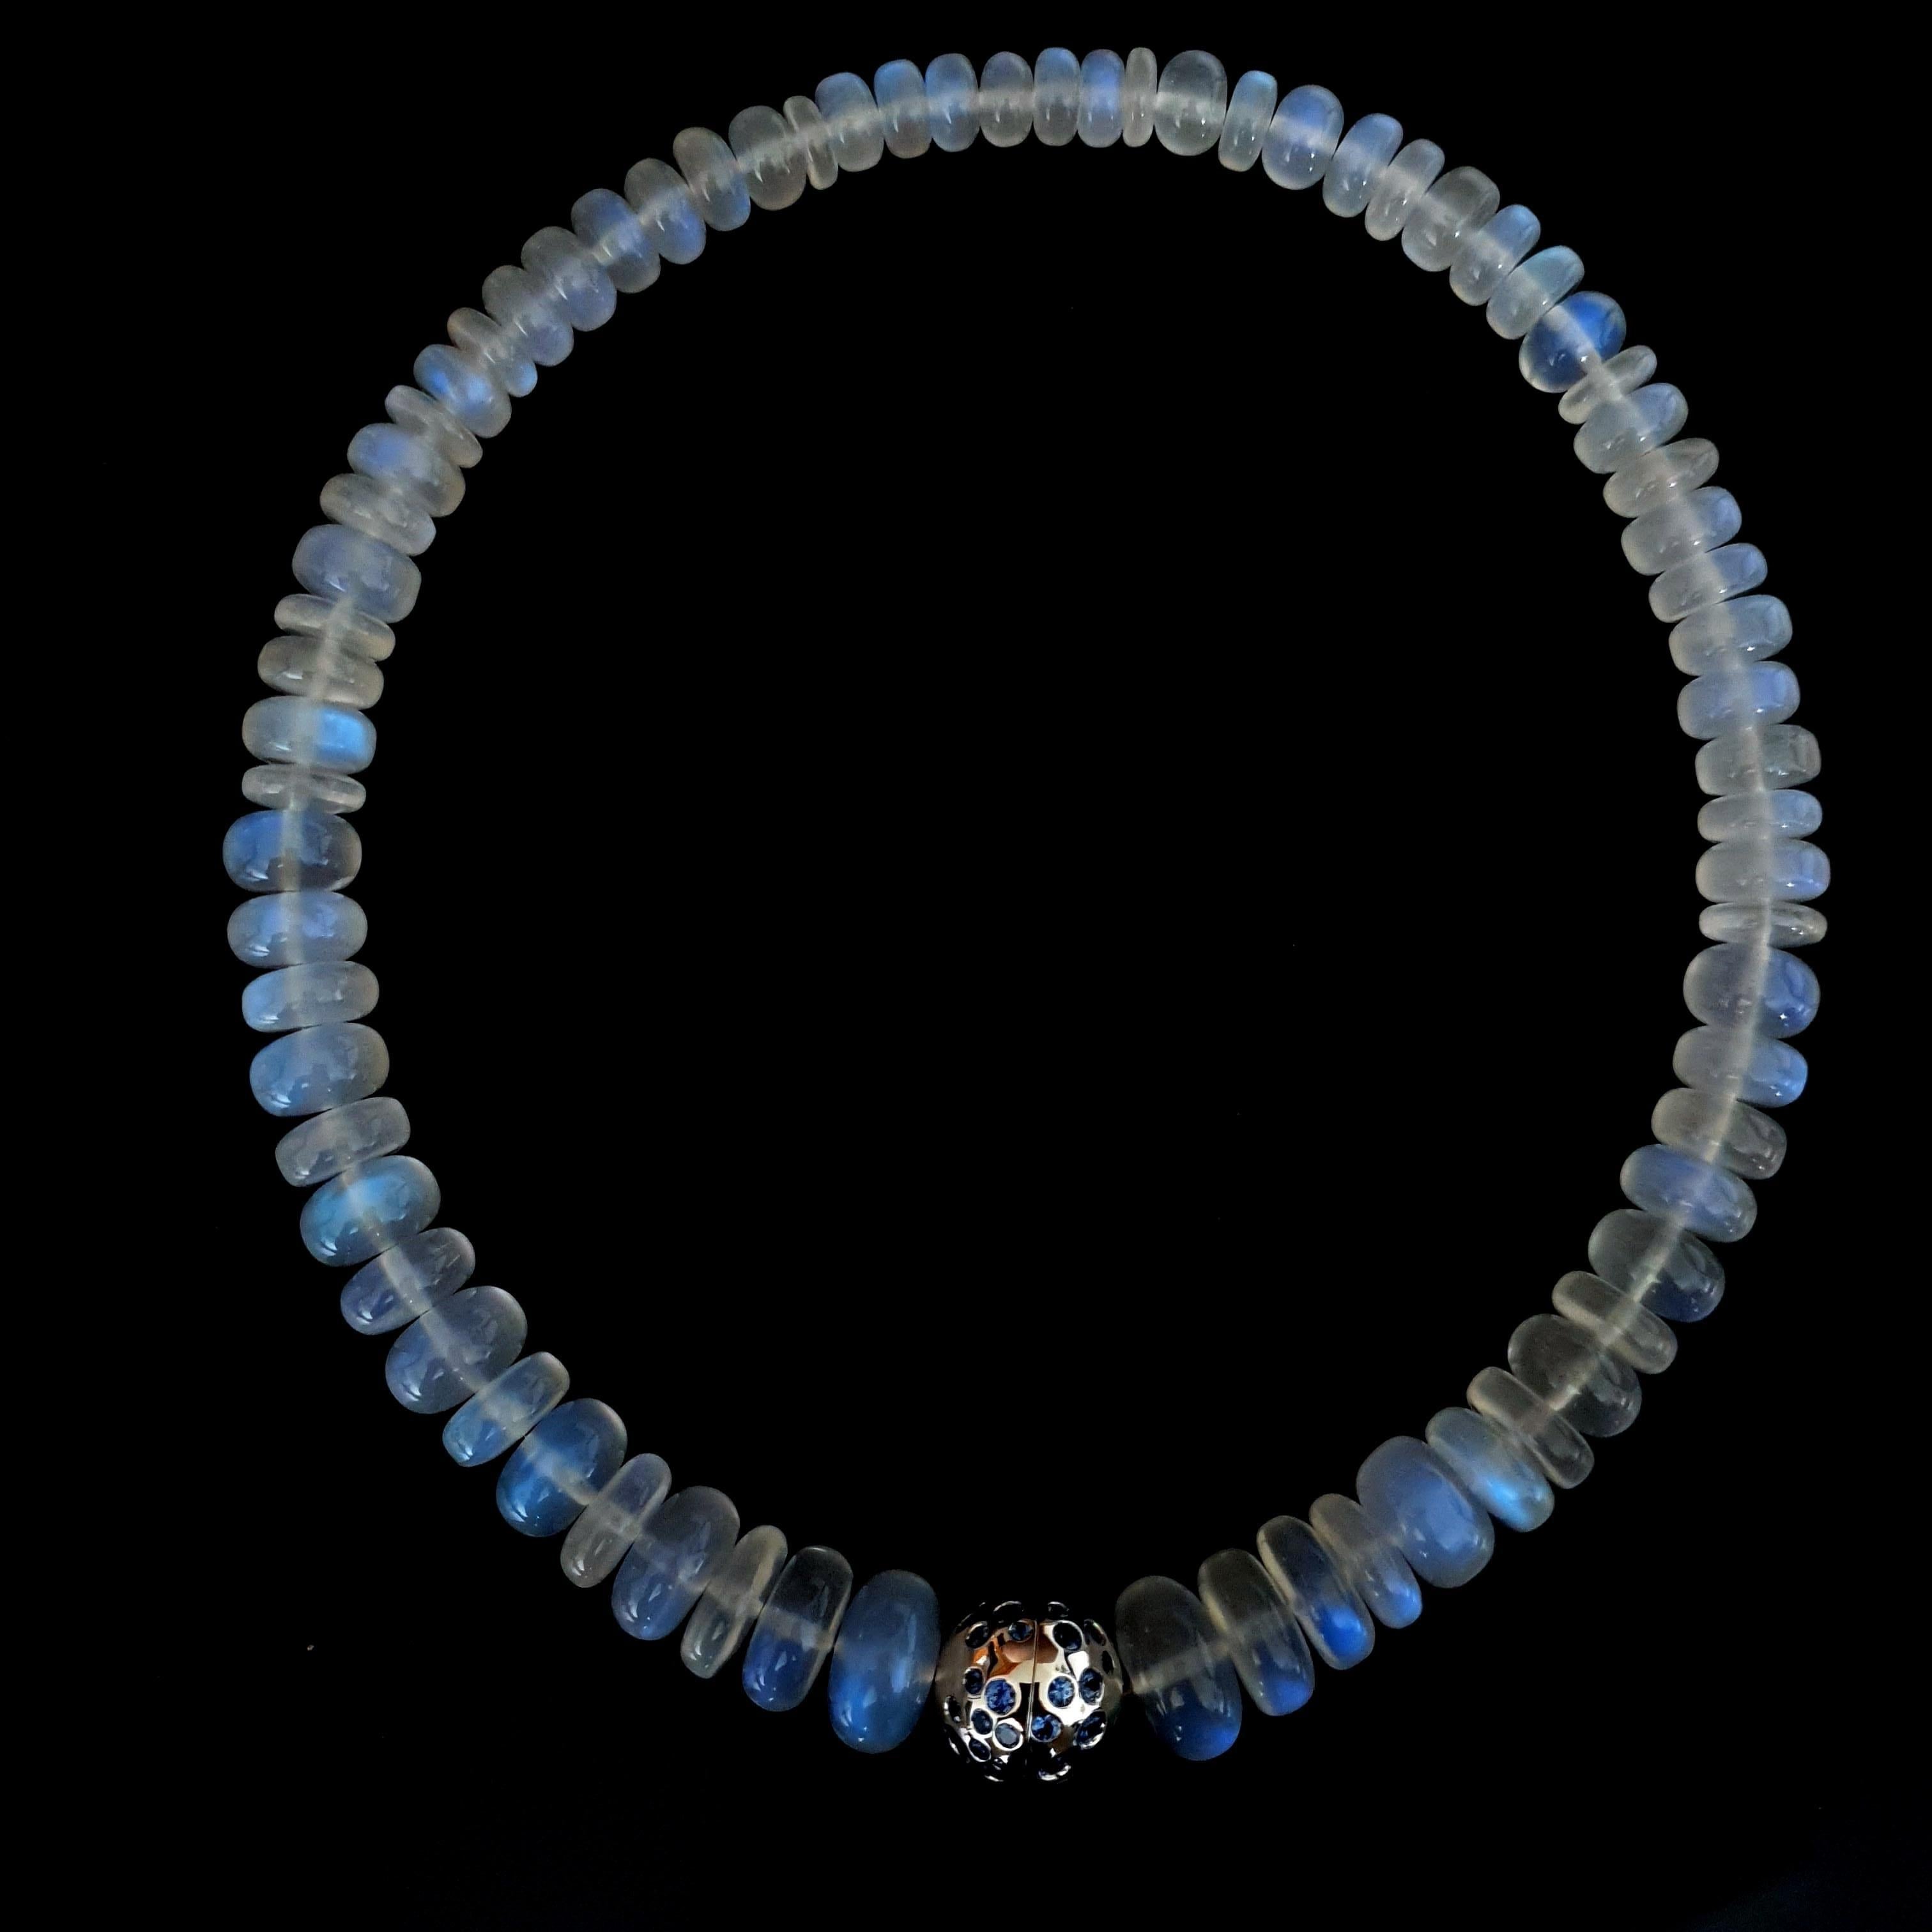 Blue Moonstone Rondel Beaded Necklace with 18 Carat White Gold Sapphire Clasp For Sale 3